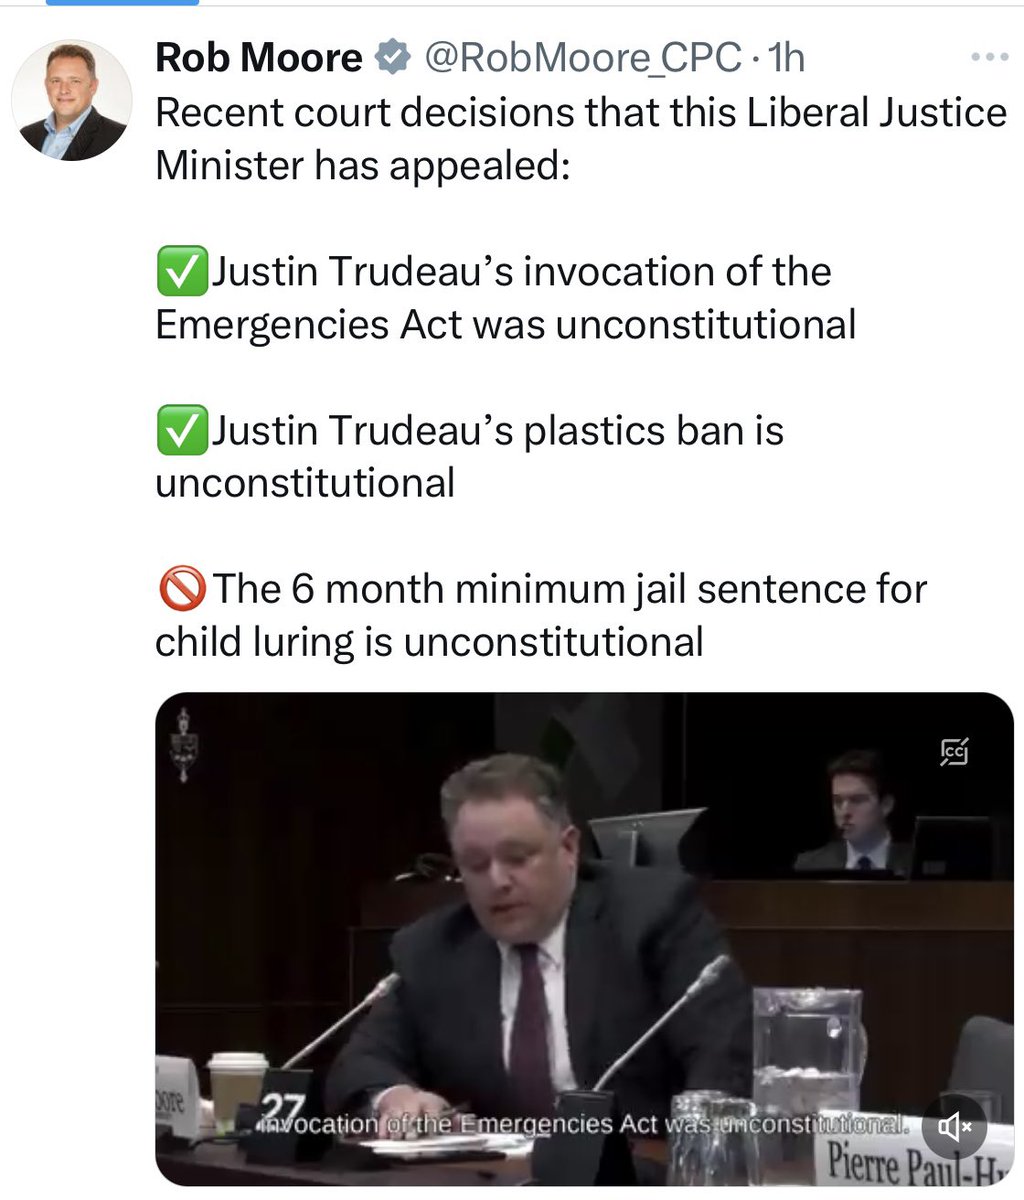 I’m dismayed to see a lawyer and Parliamentarian blatantly misleading the public. @RobMoore_CPC, you know that decisions from the Supreme Court, like the third in your list, cannot be appealed. You can disagree on policy, but it’s beneath us to ignore basic facts.